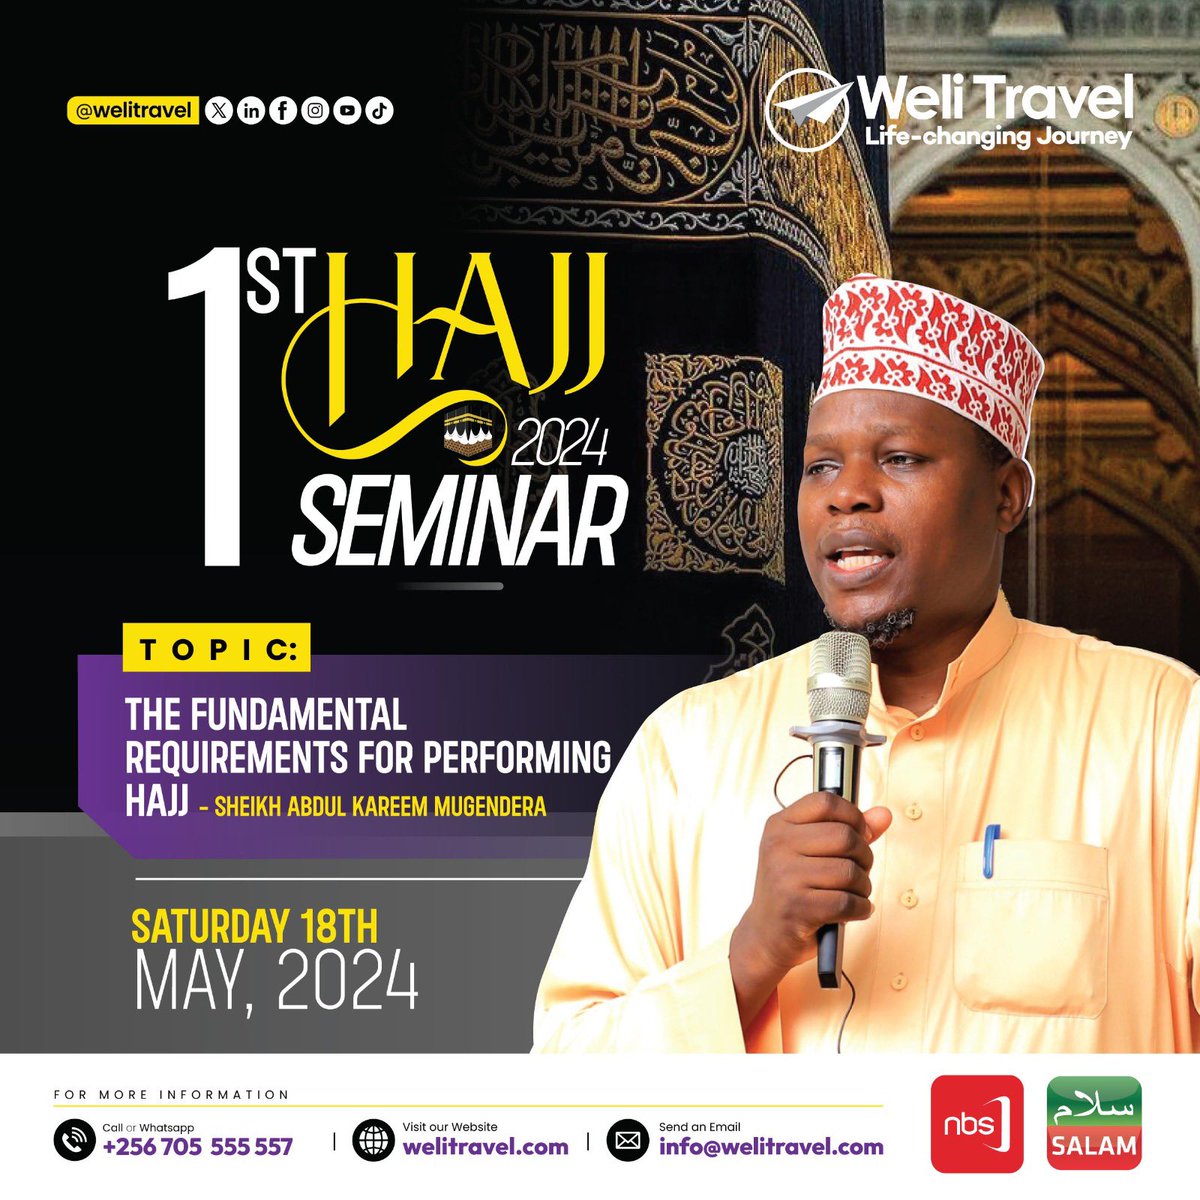 Join us in Sheikh Mugendera's in-depth exploration of the fundamental requirements for performing Hajj.

Catch all the proceedings by following @welitravel, @SalamTvUG, and @nbstv!
#welitravel | #lifechangingjourney | #HajjwithWeli